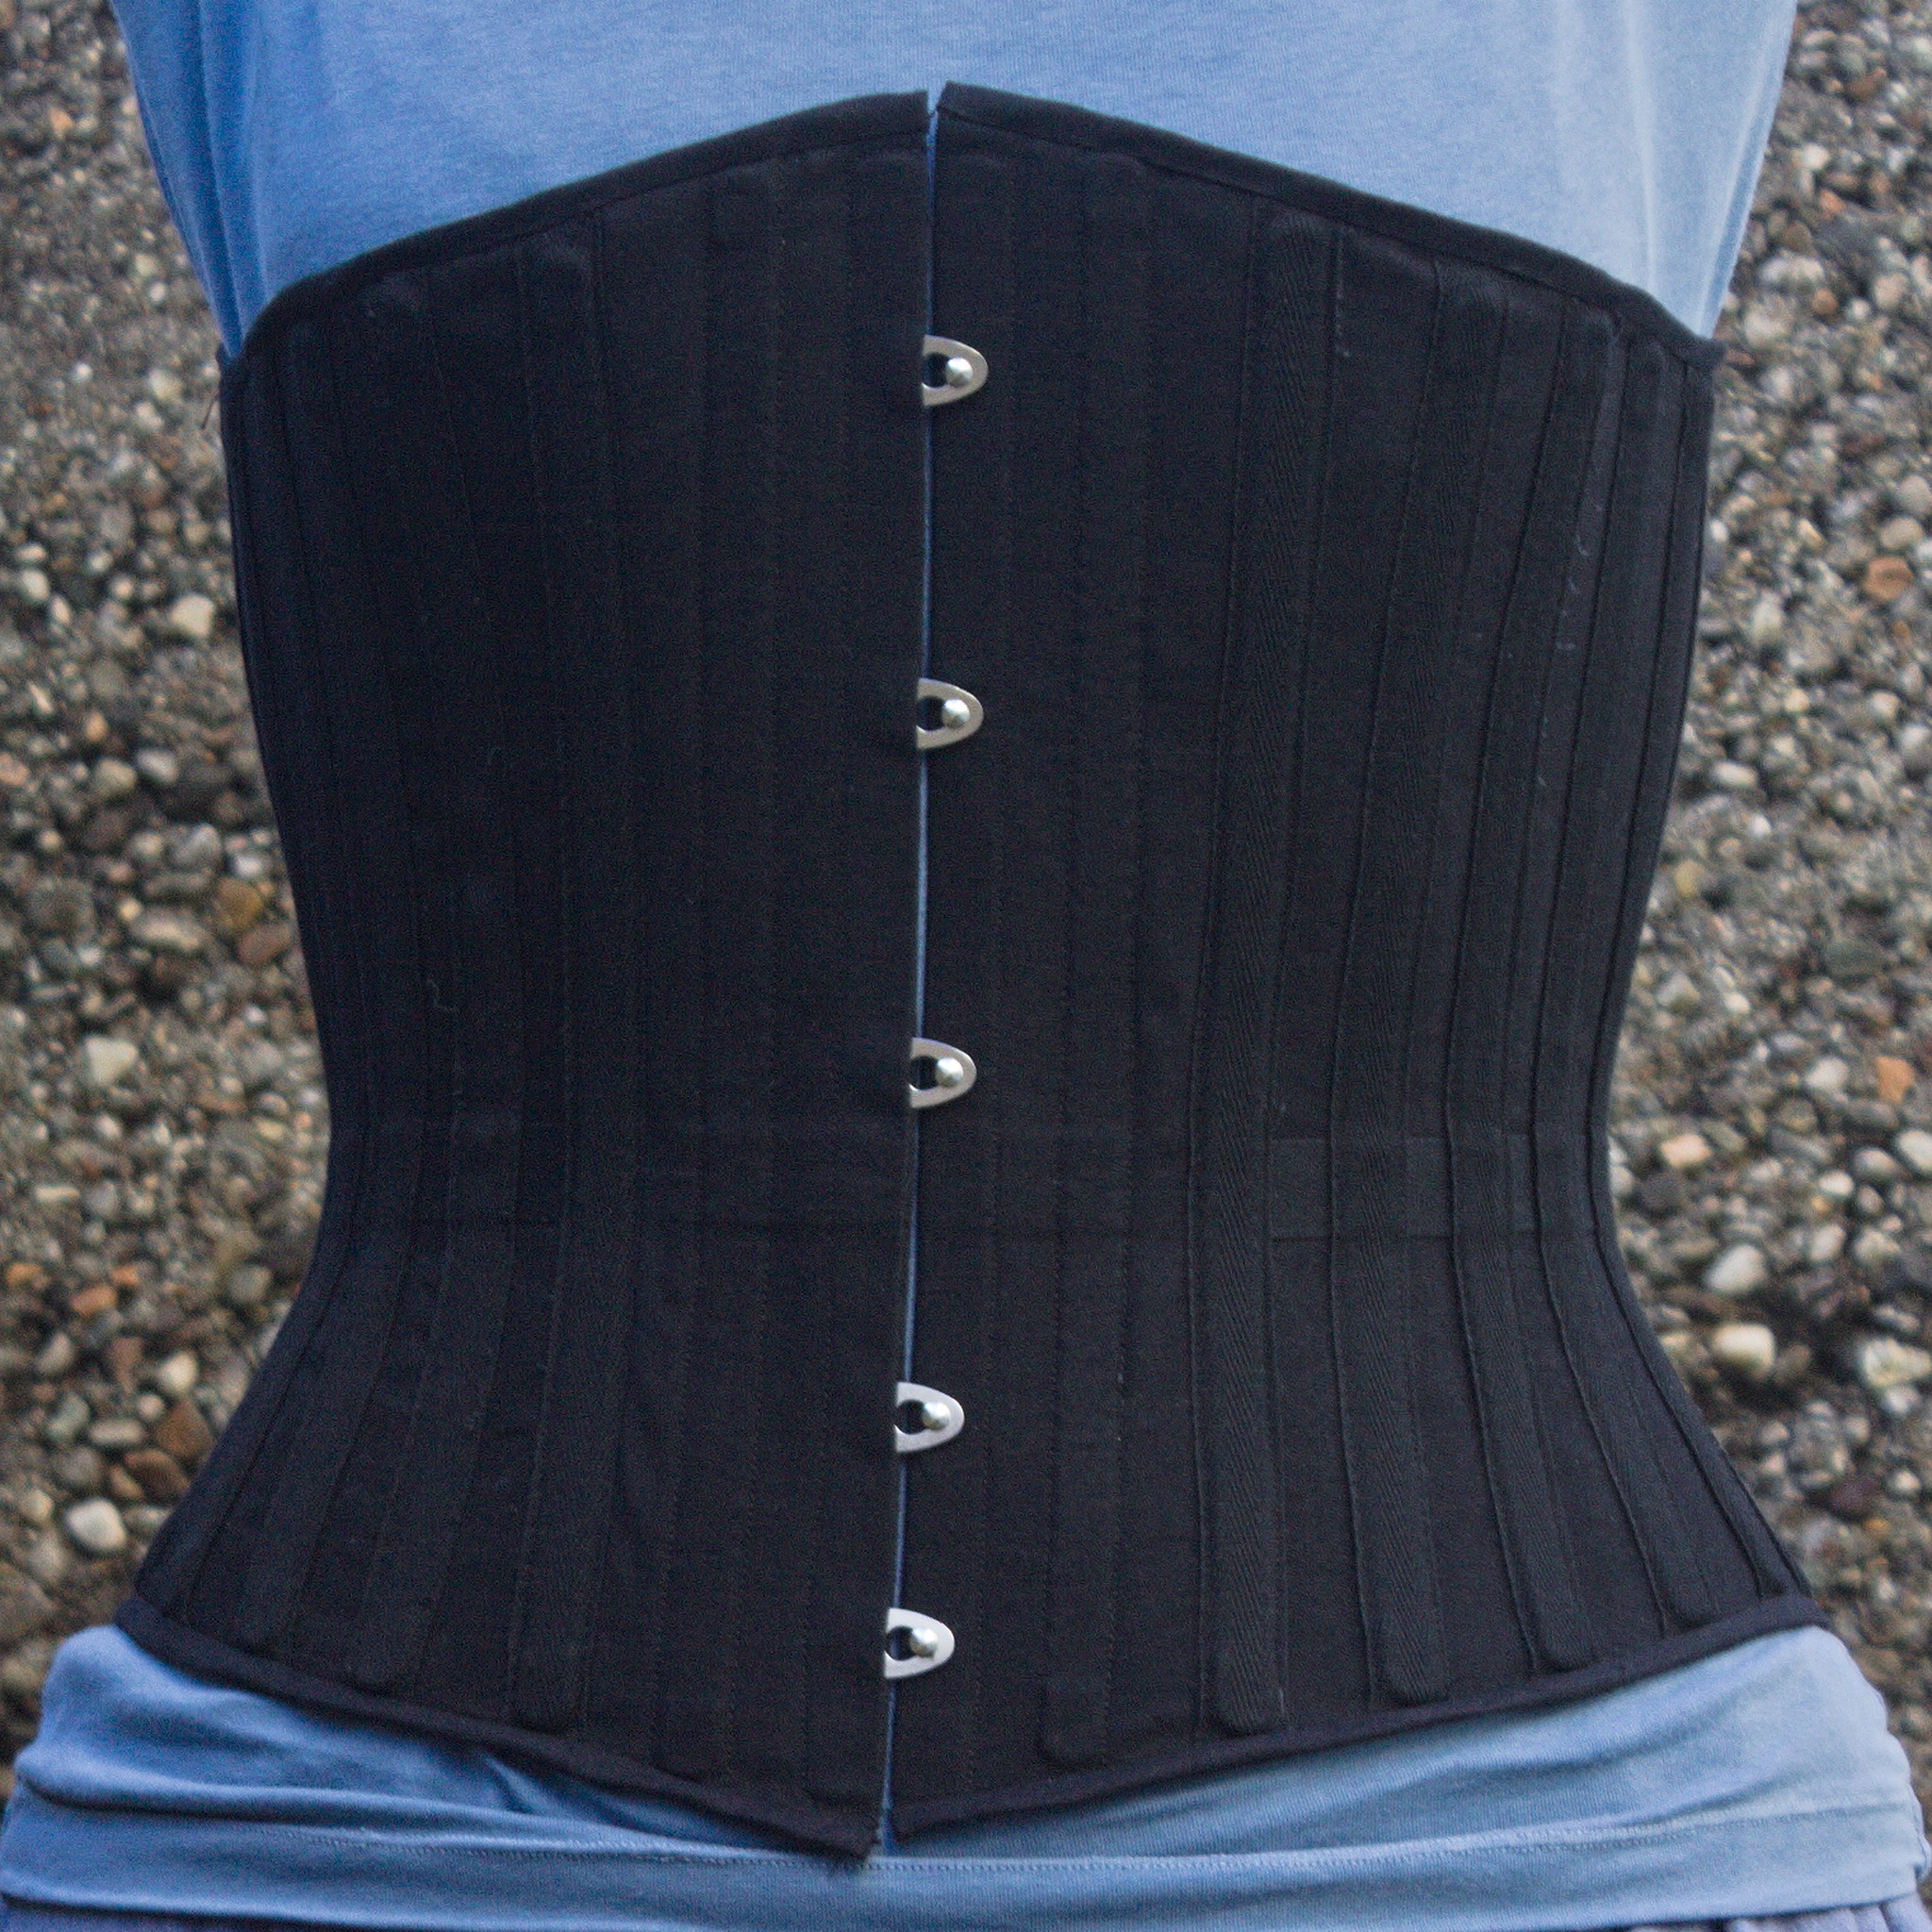 The same corset straight from the front: the left side is a few mm longer than the right side